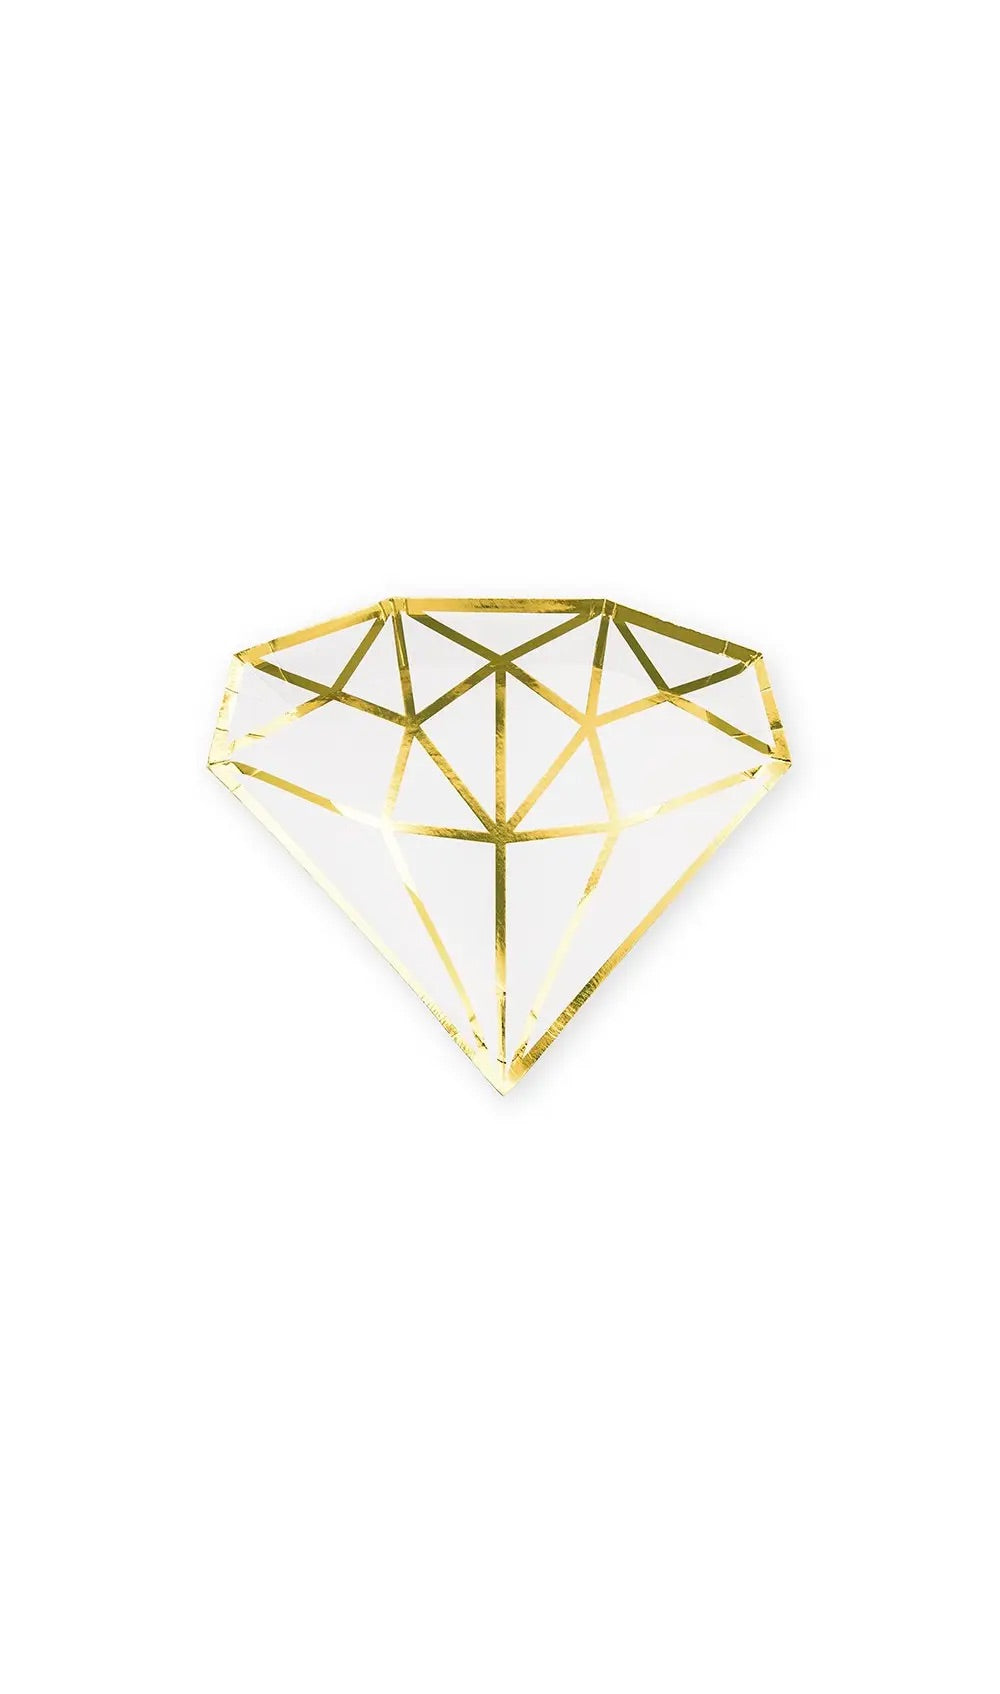 Small Gold Diamond Disposable Paper Party Plates